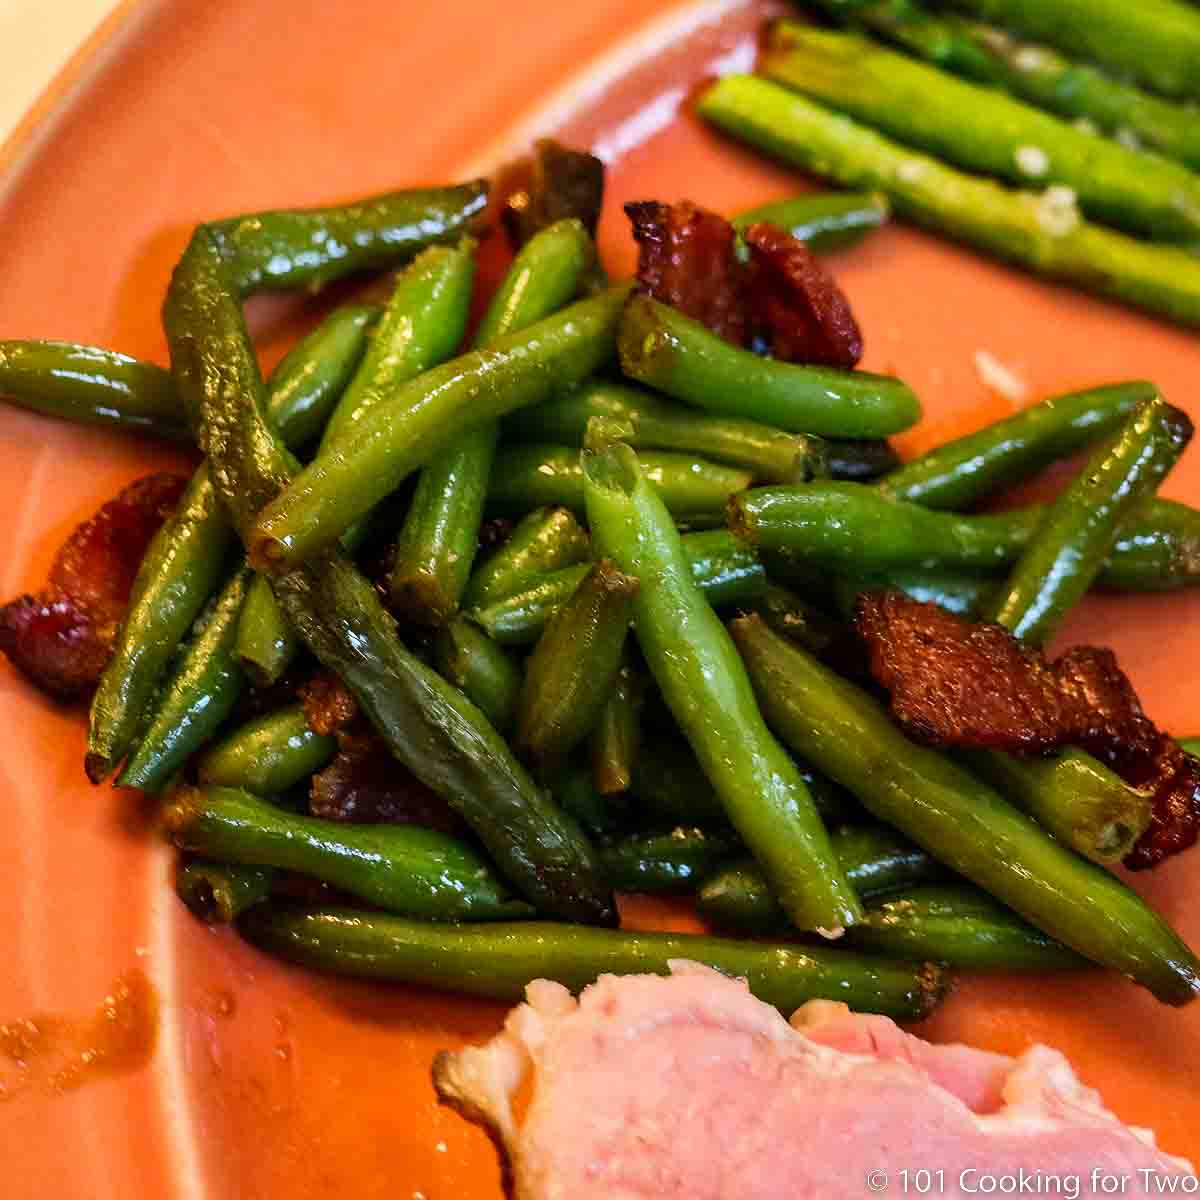 green beans with bacon on an orange plate.